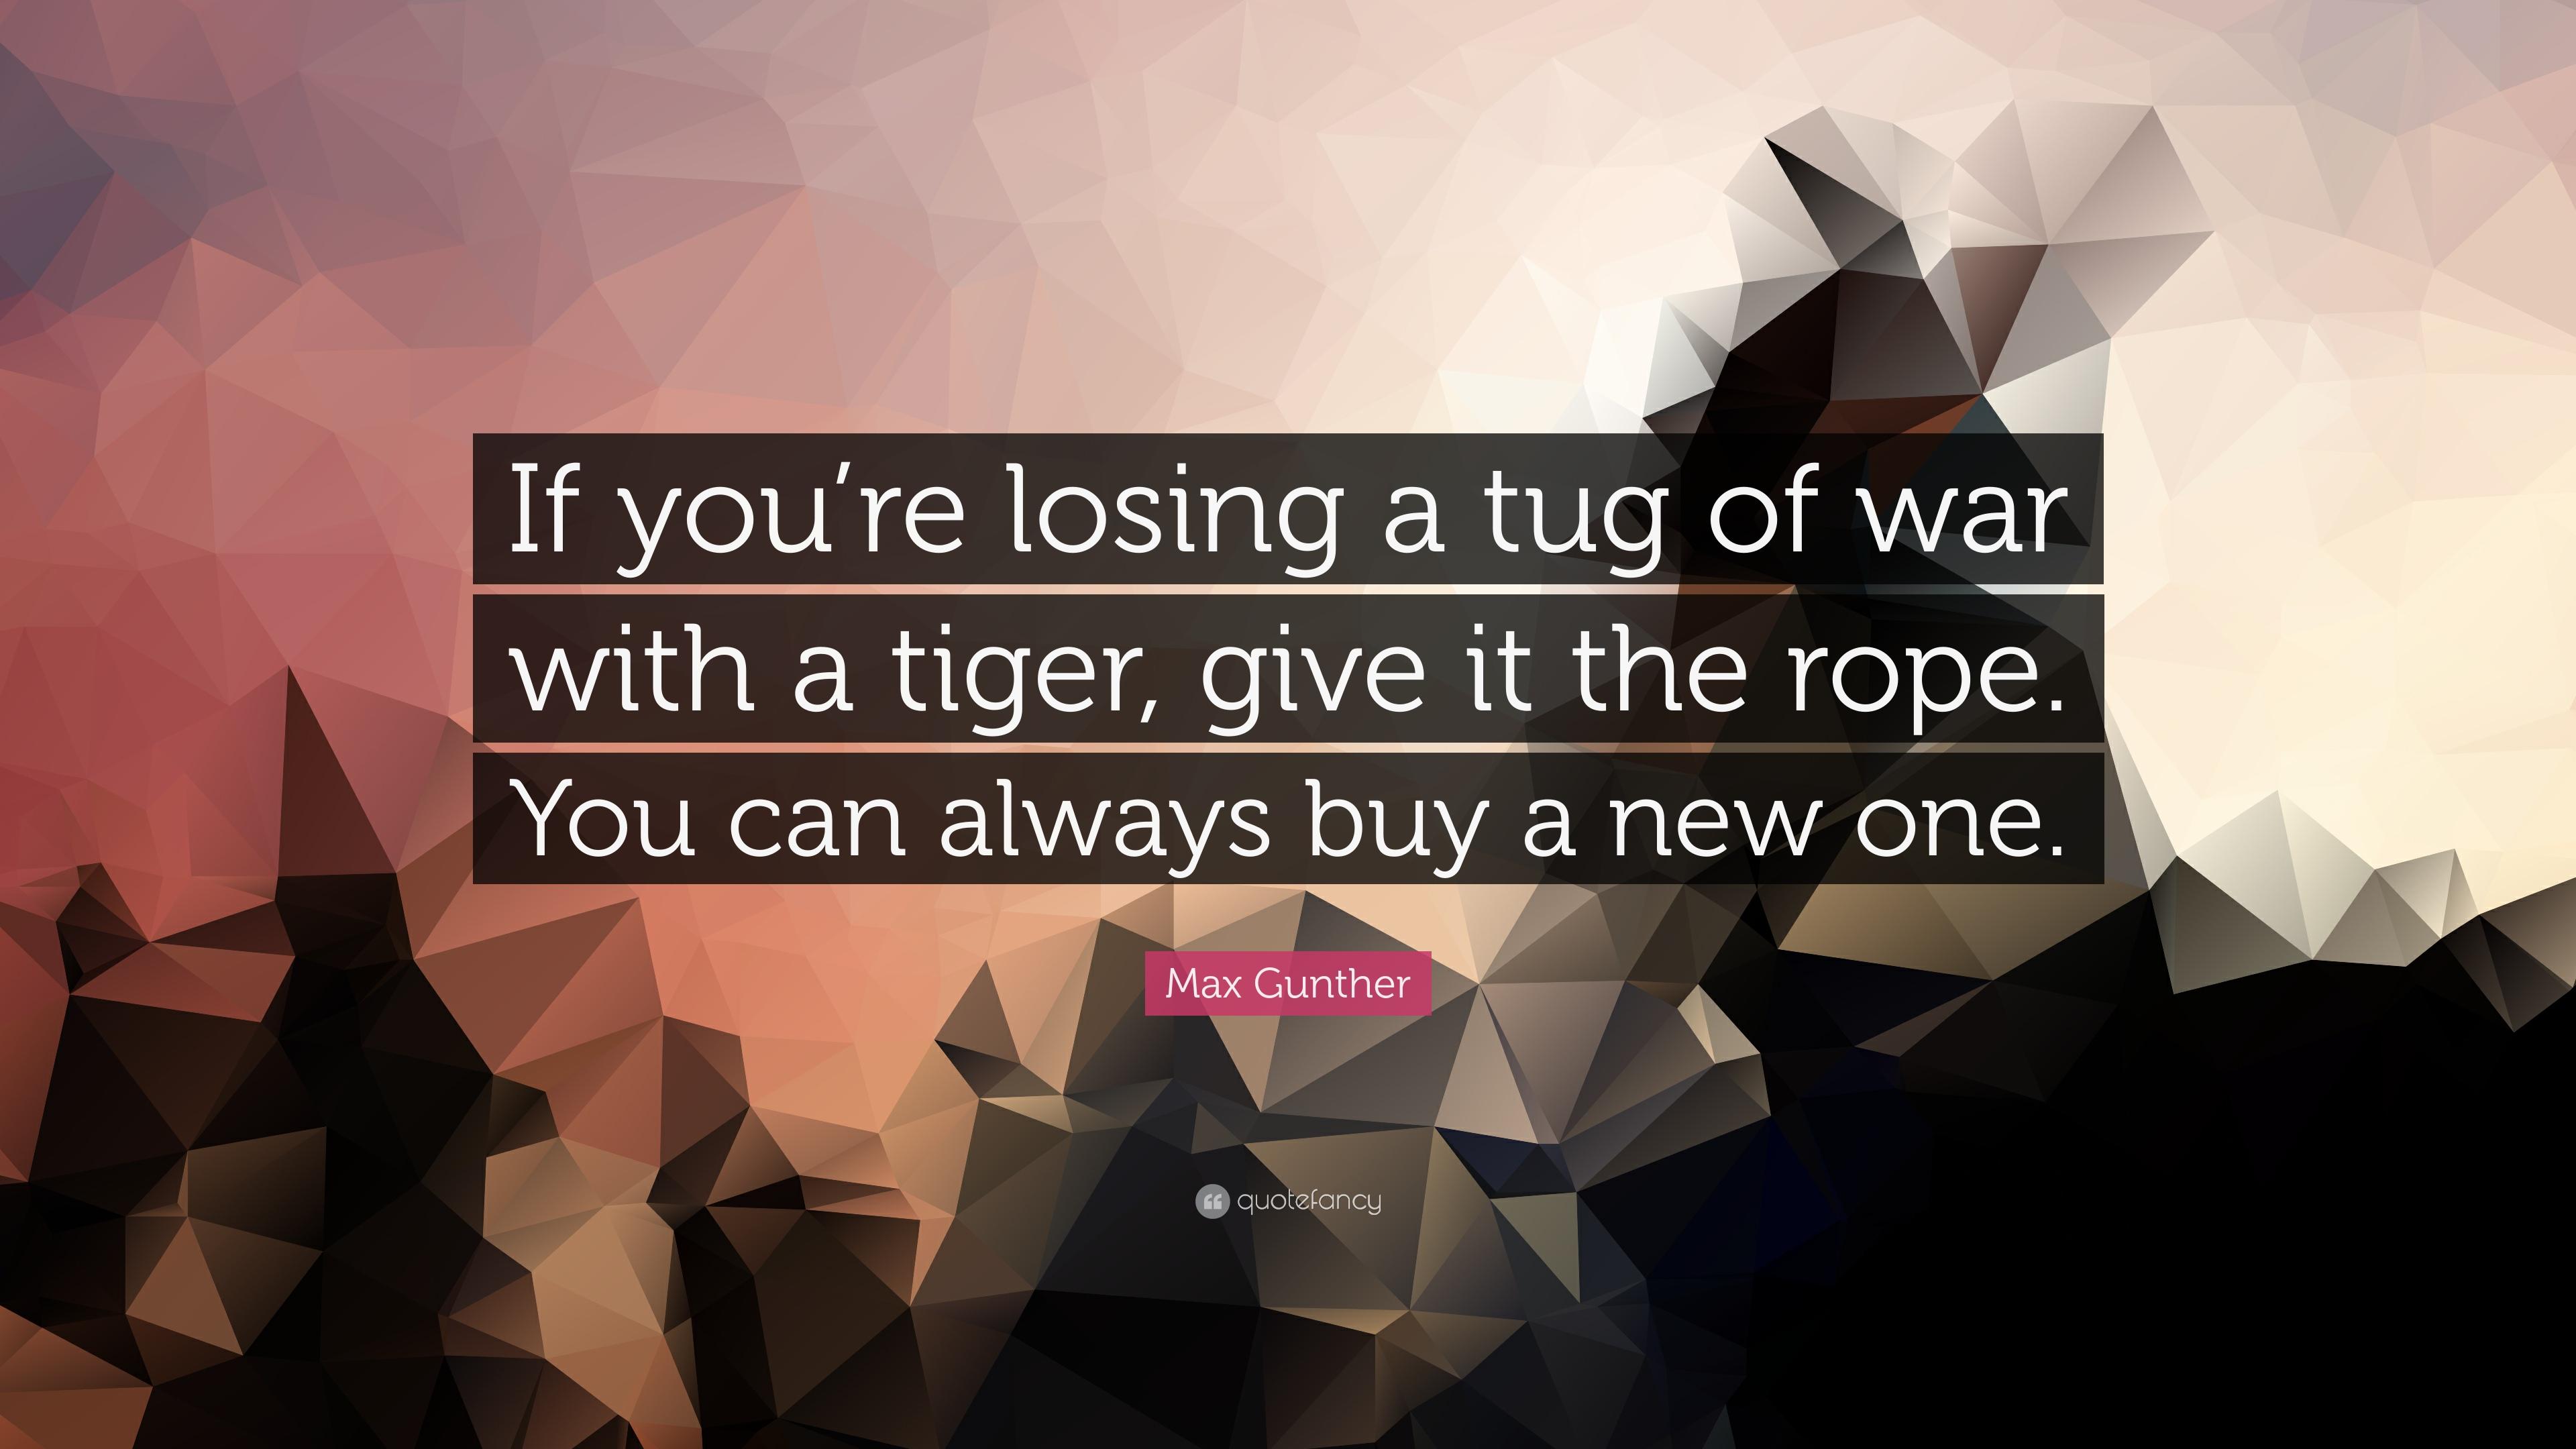 Max Gunther Quote: “If you're losing a tug of war with a tiger, give